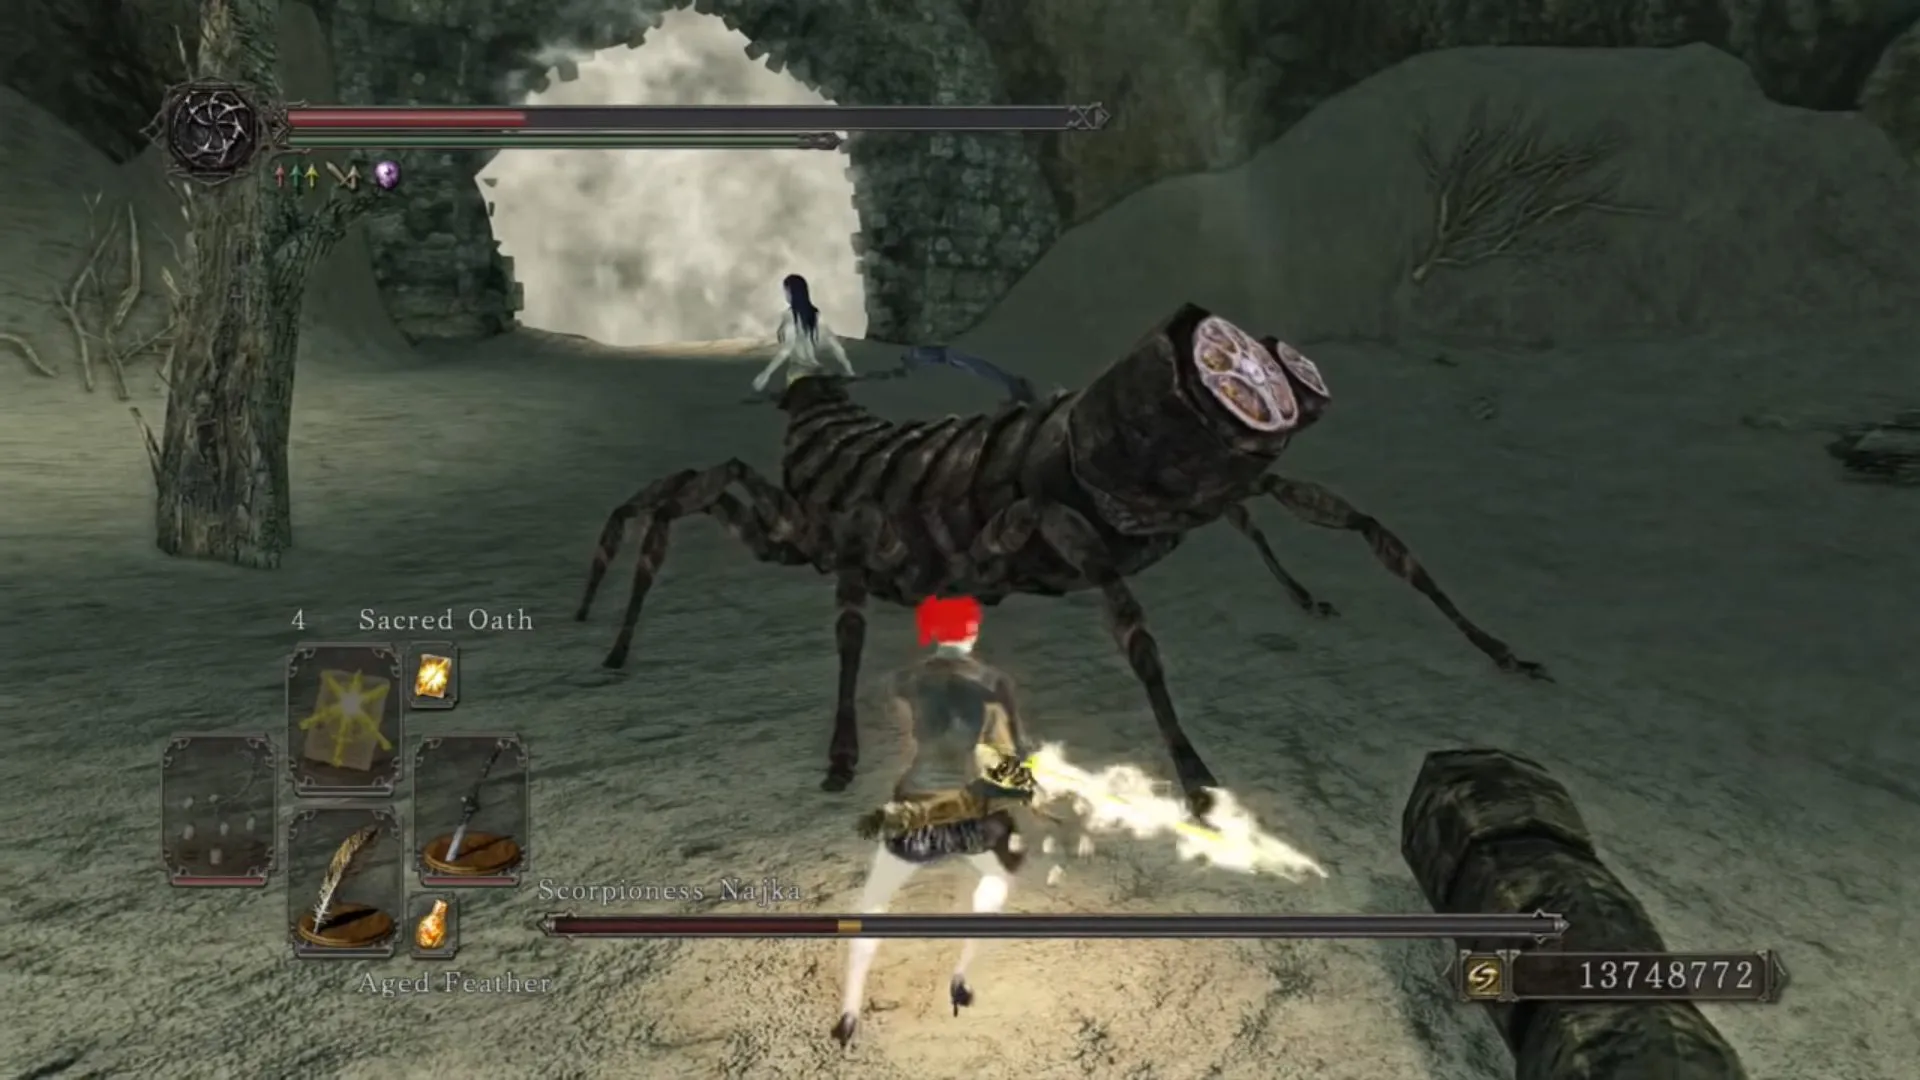 I didn't you could slice off all these Dark Souls II limbs and tails